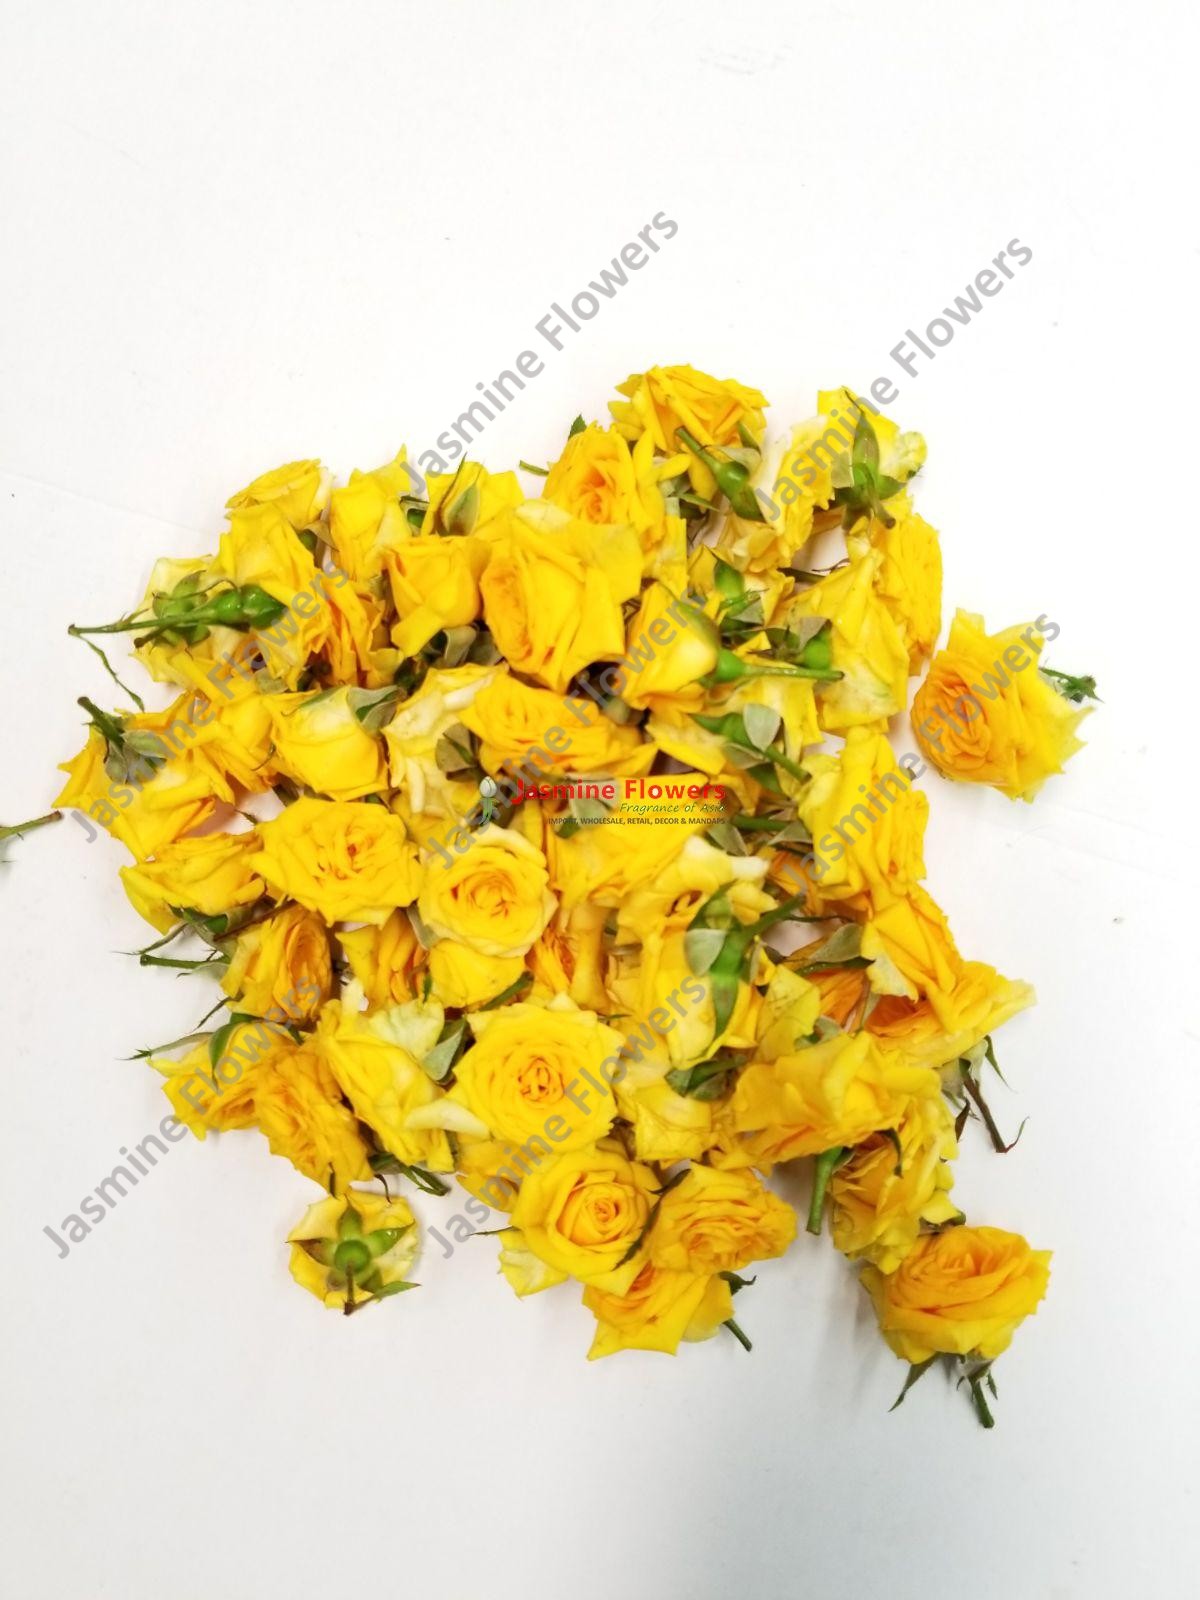 BUTTON ROSE YELLOW